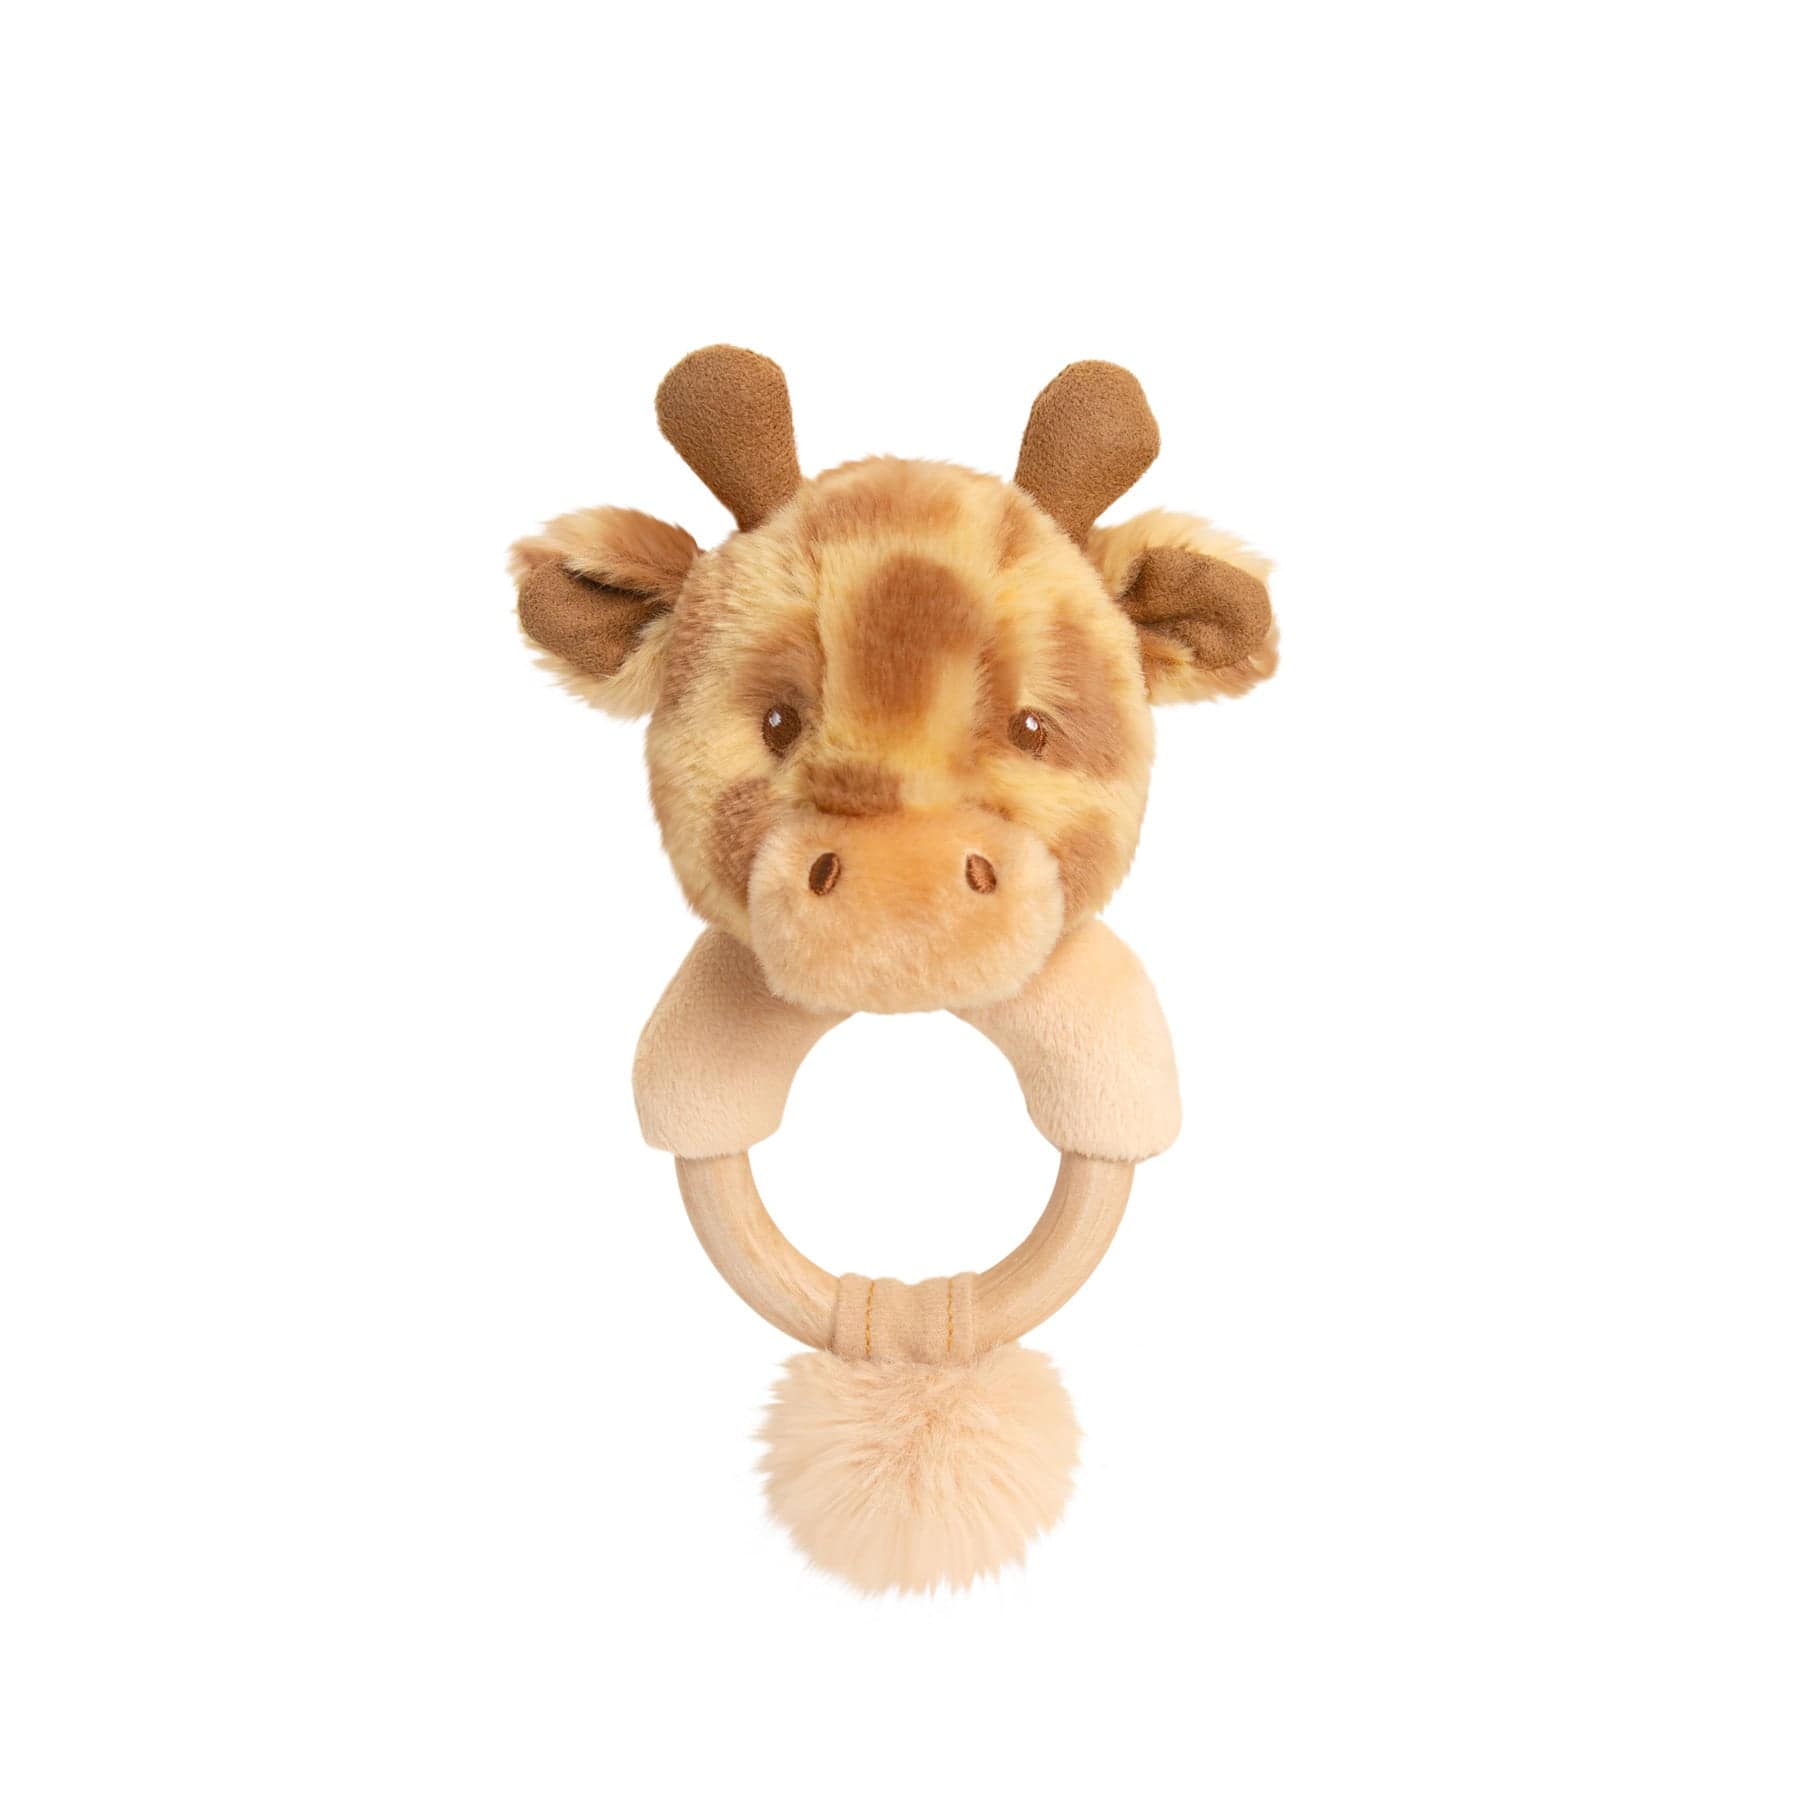 Plush giraffe toy rattle with wooden teething ring and soft fur tail isolated on white background